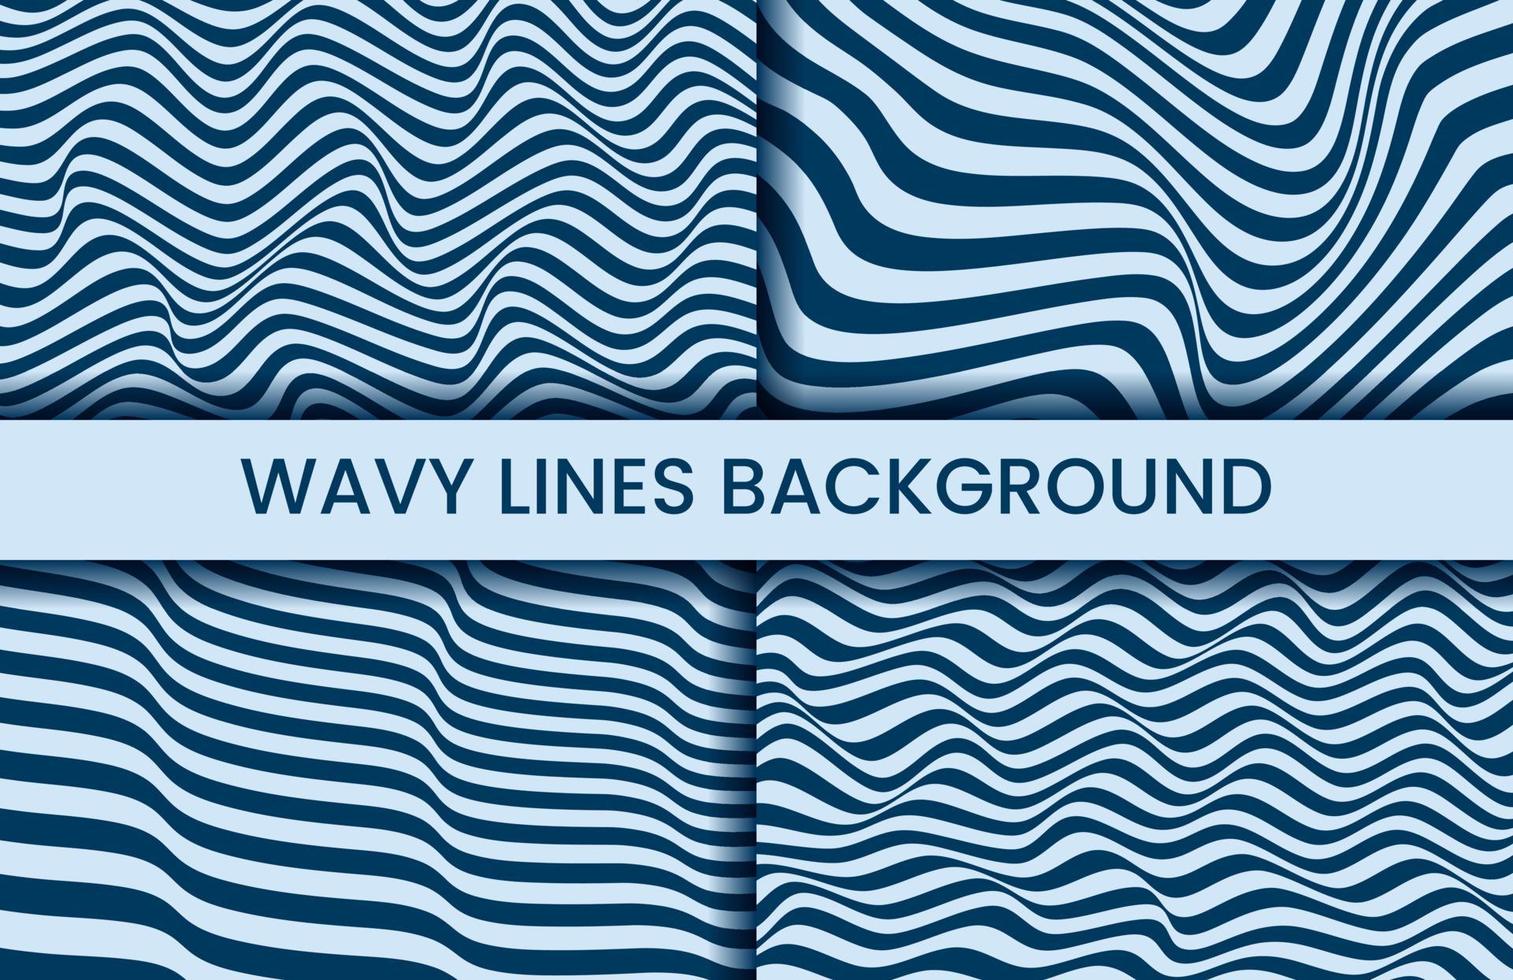 Wavy Lines Abstract Background vector